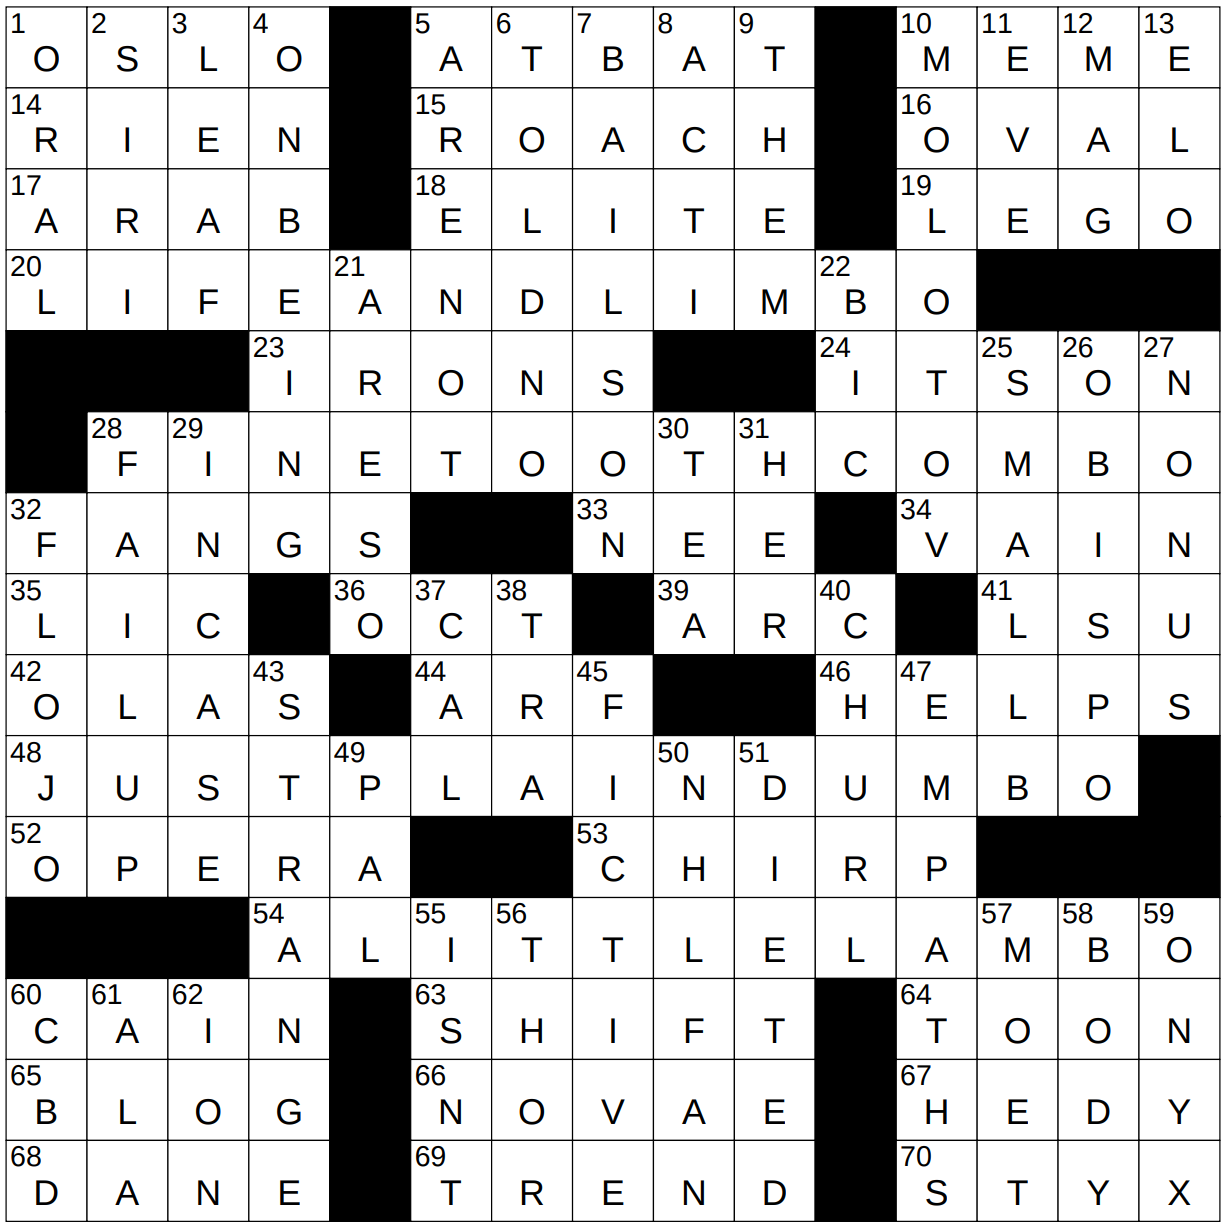 CORRECTION: New crossword puzzle for Jan. 5 issue